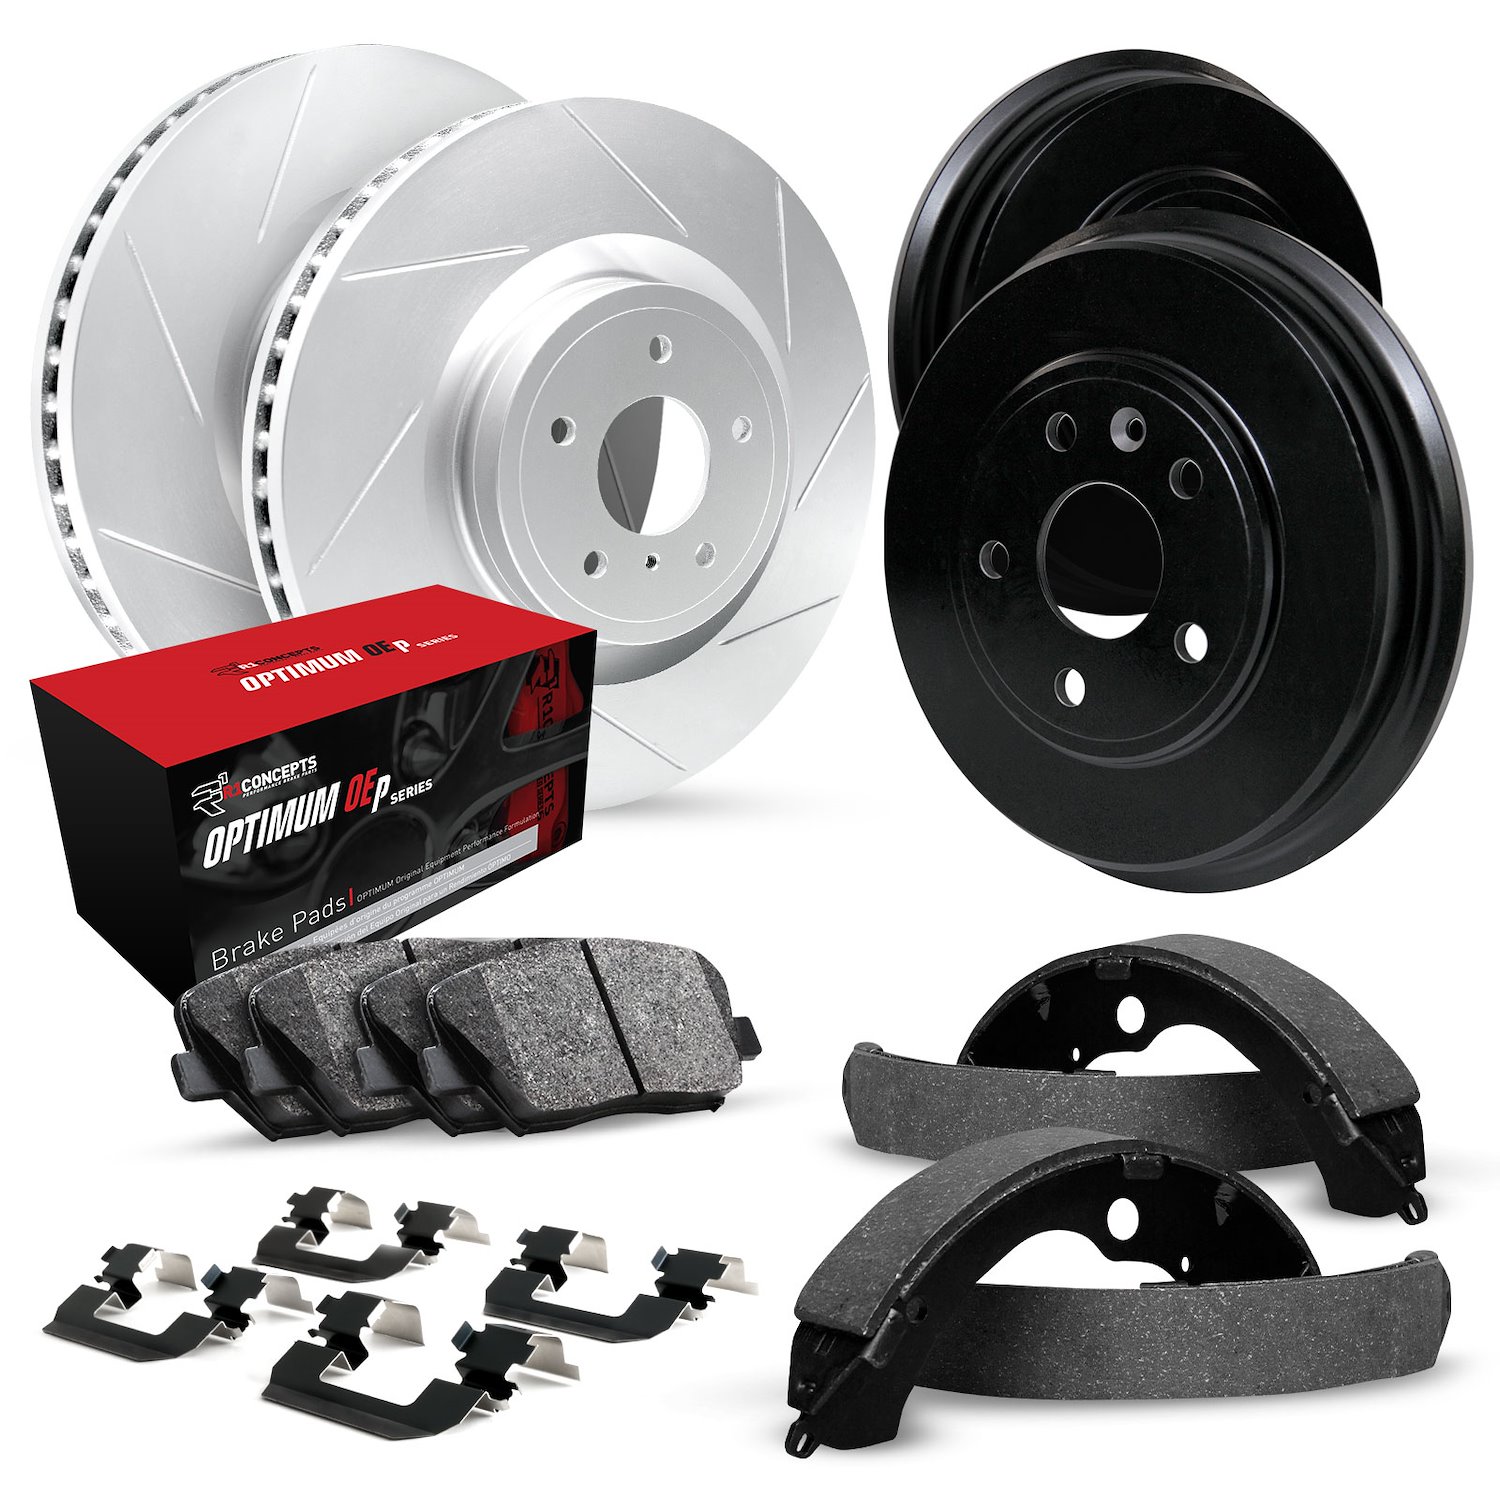 GEO-Carbon Slotted Brake Rotor & Drum Set w/Optimum OE Pads, Shoes, & Hardware, 1995-1998 Ford/Lincoln/Mercury/Mazda